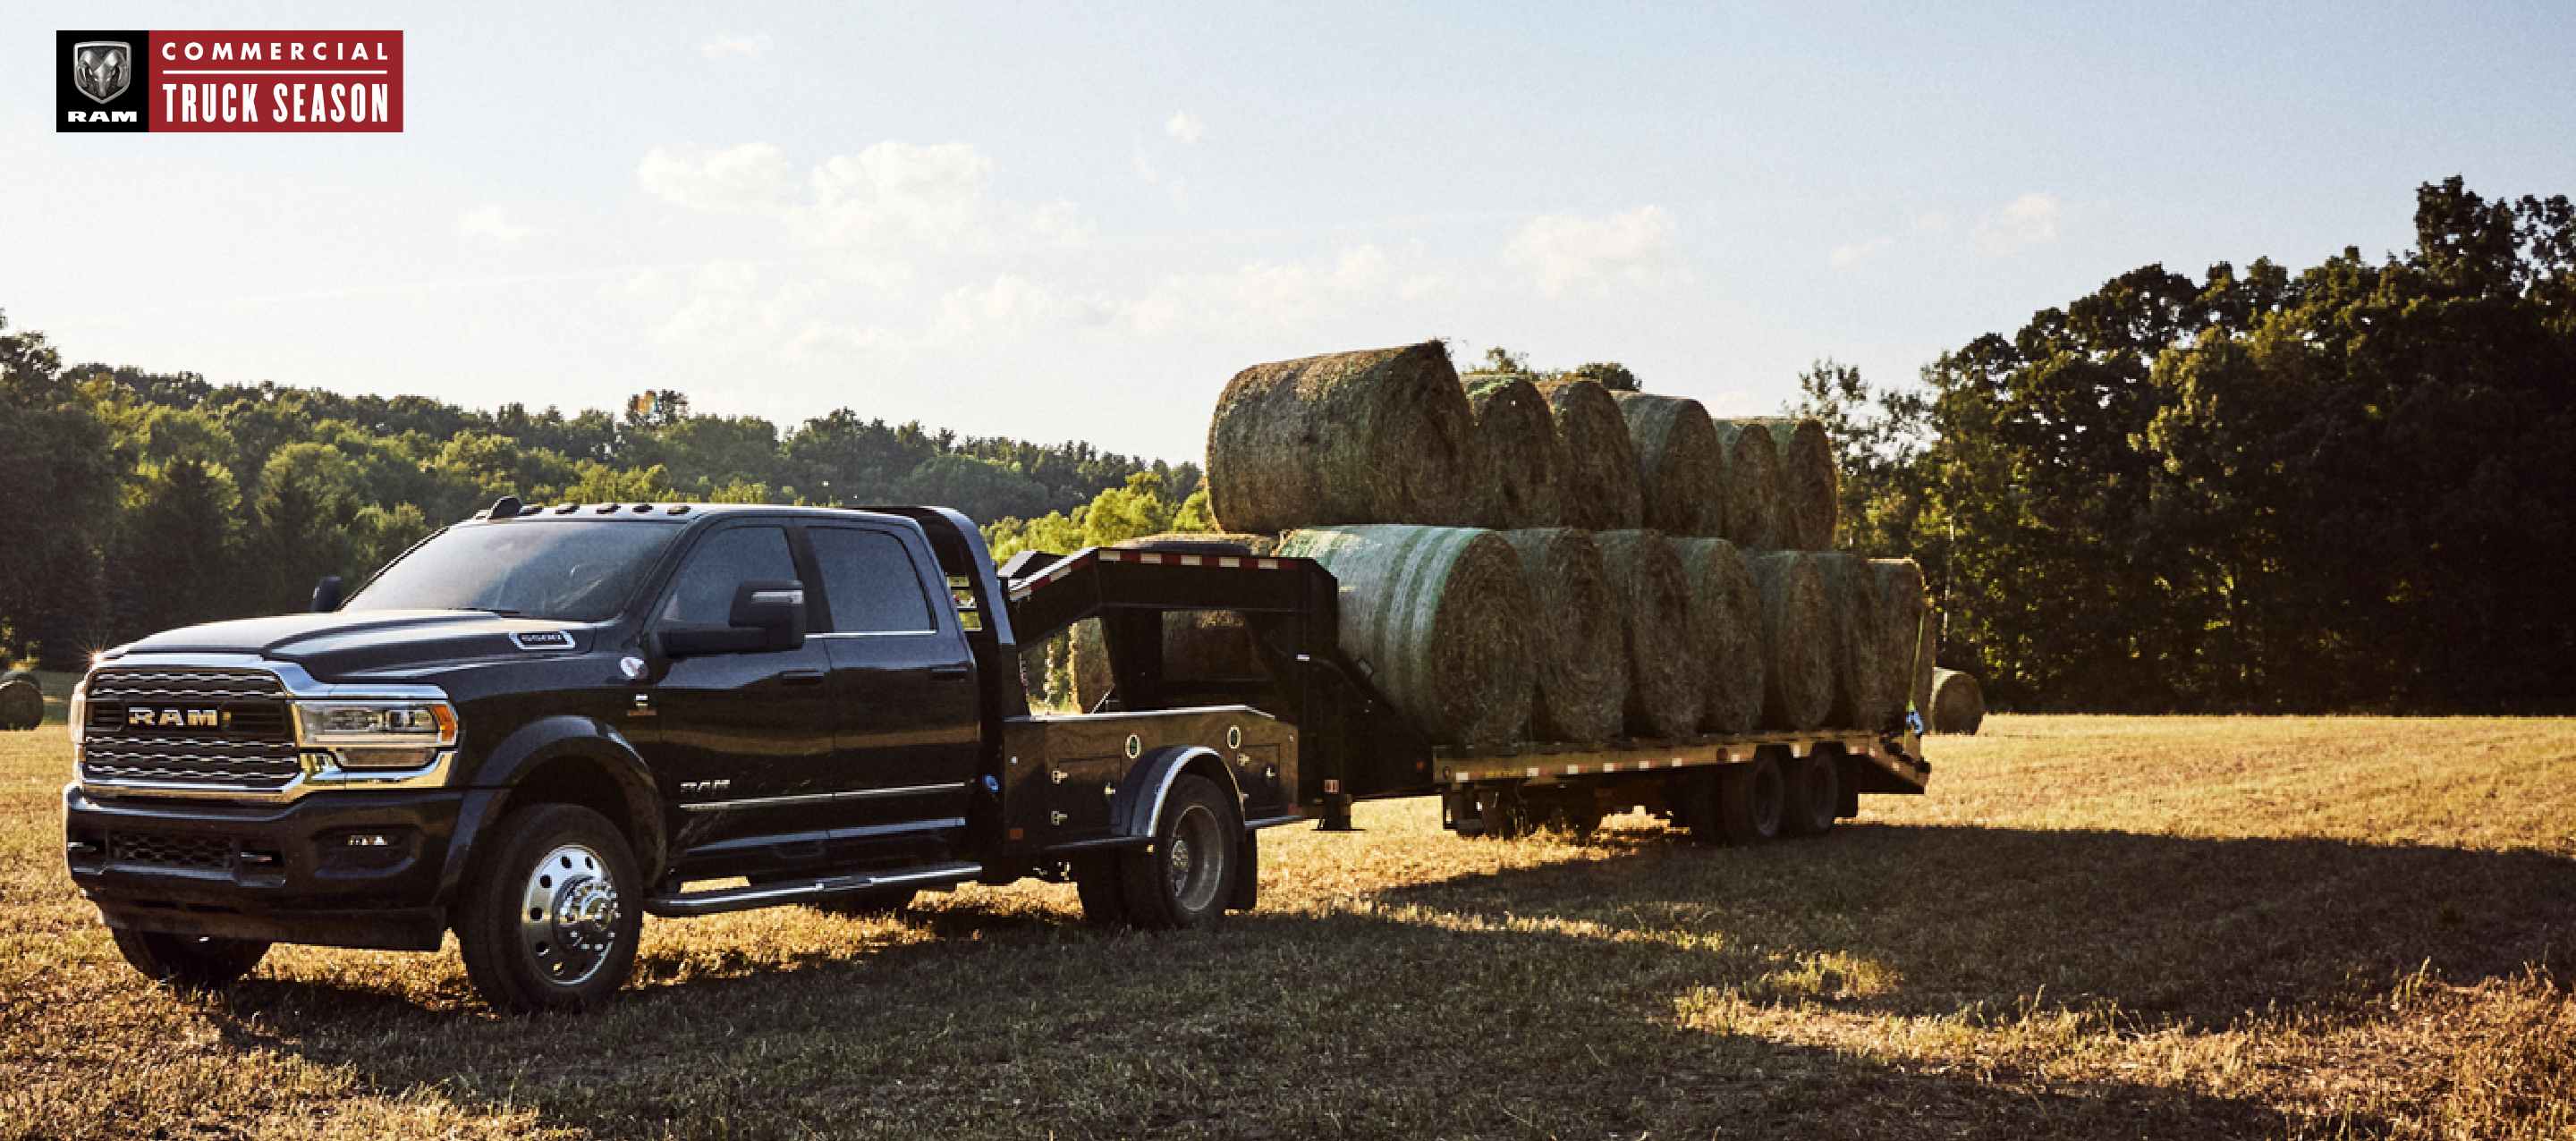 A black 2023 Ram 5500 Limited Chassis Crew Cab parked in a field with a Rancher Upfit carrying a dozen large bales of hay. Ram Commercial Truck Season.